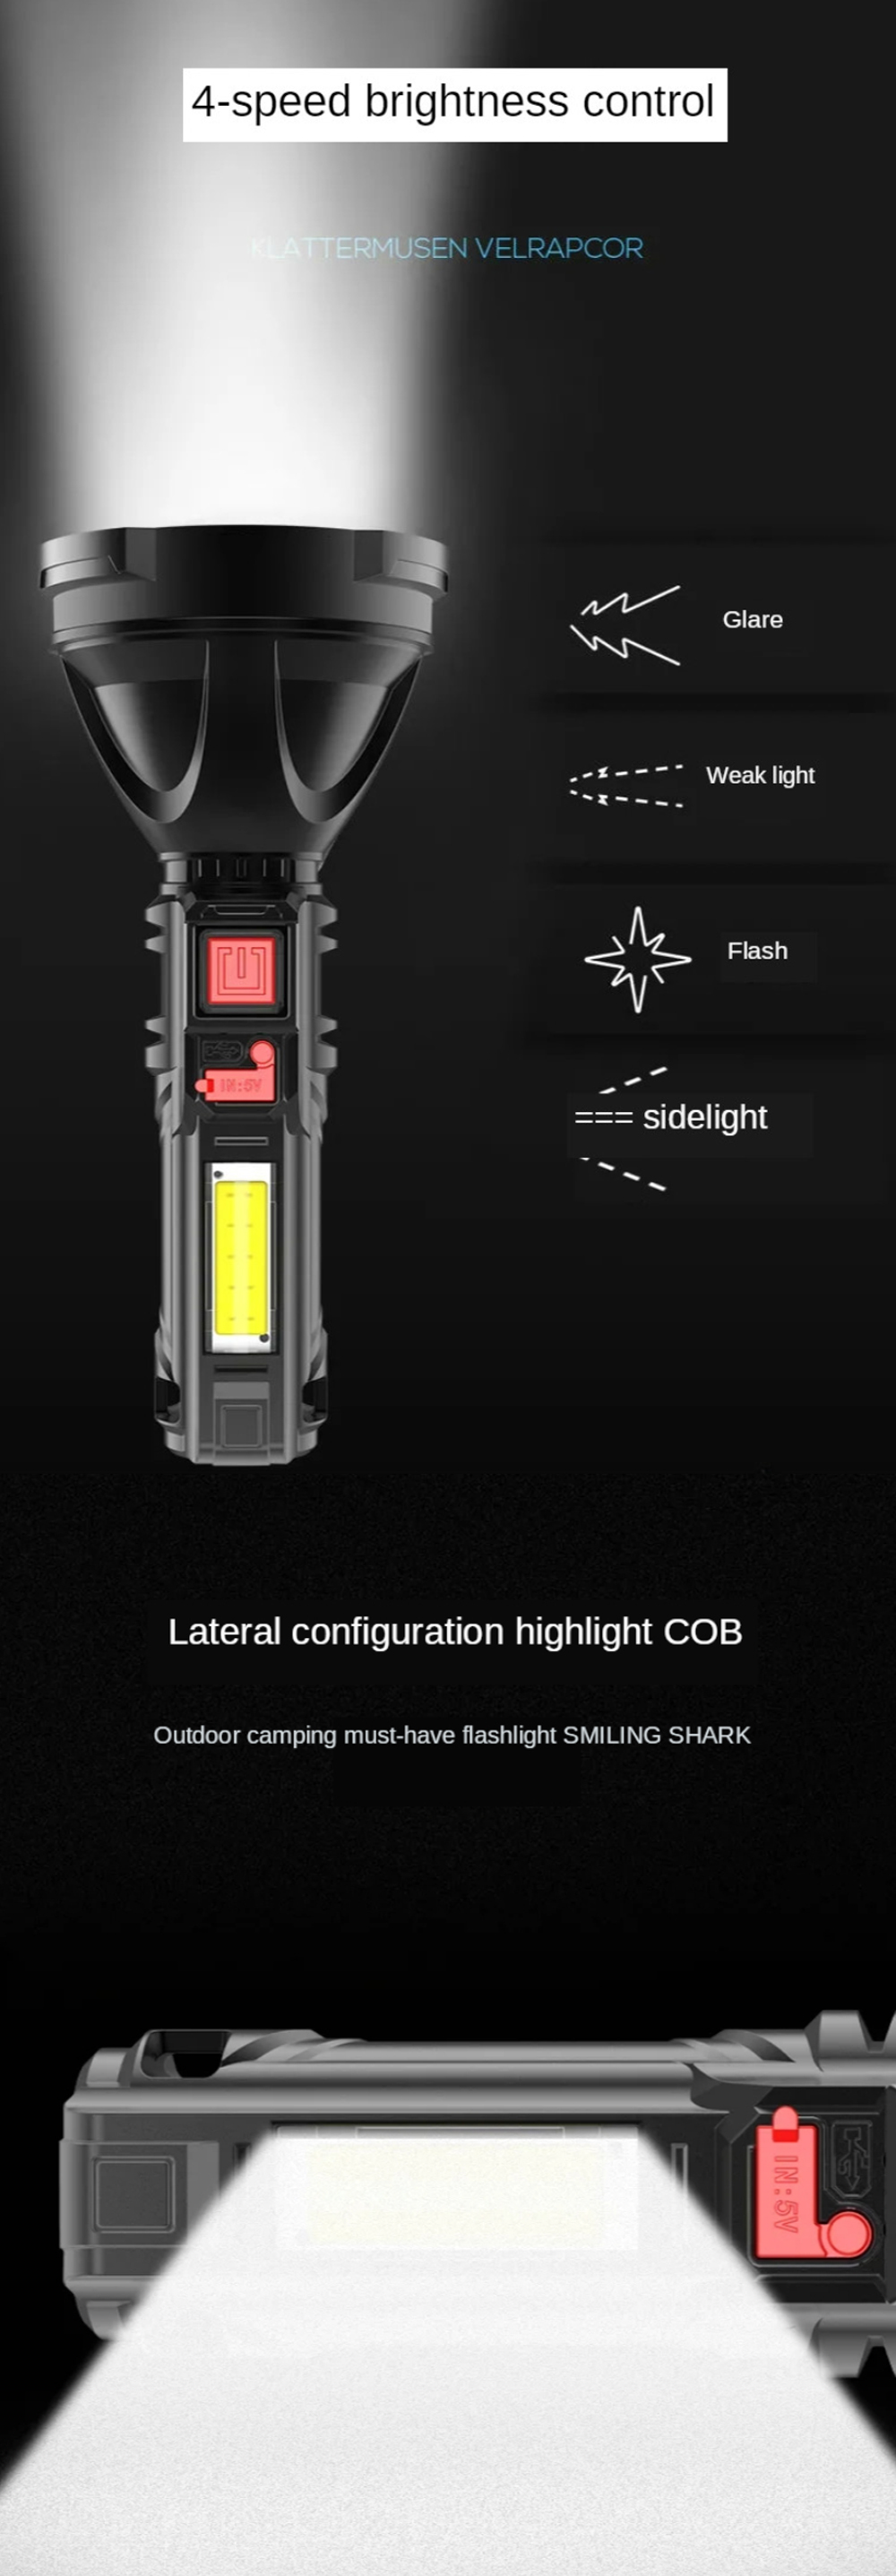 BIKIGHT 2000lm Long Shoot Strong OSL Flashlight with COB Sidelight USB Rechargeable Portable LED Torch Powerful Spotlight Come with 18650 Battery USB Cable